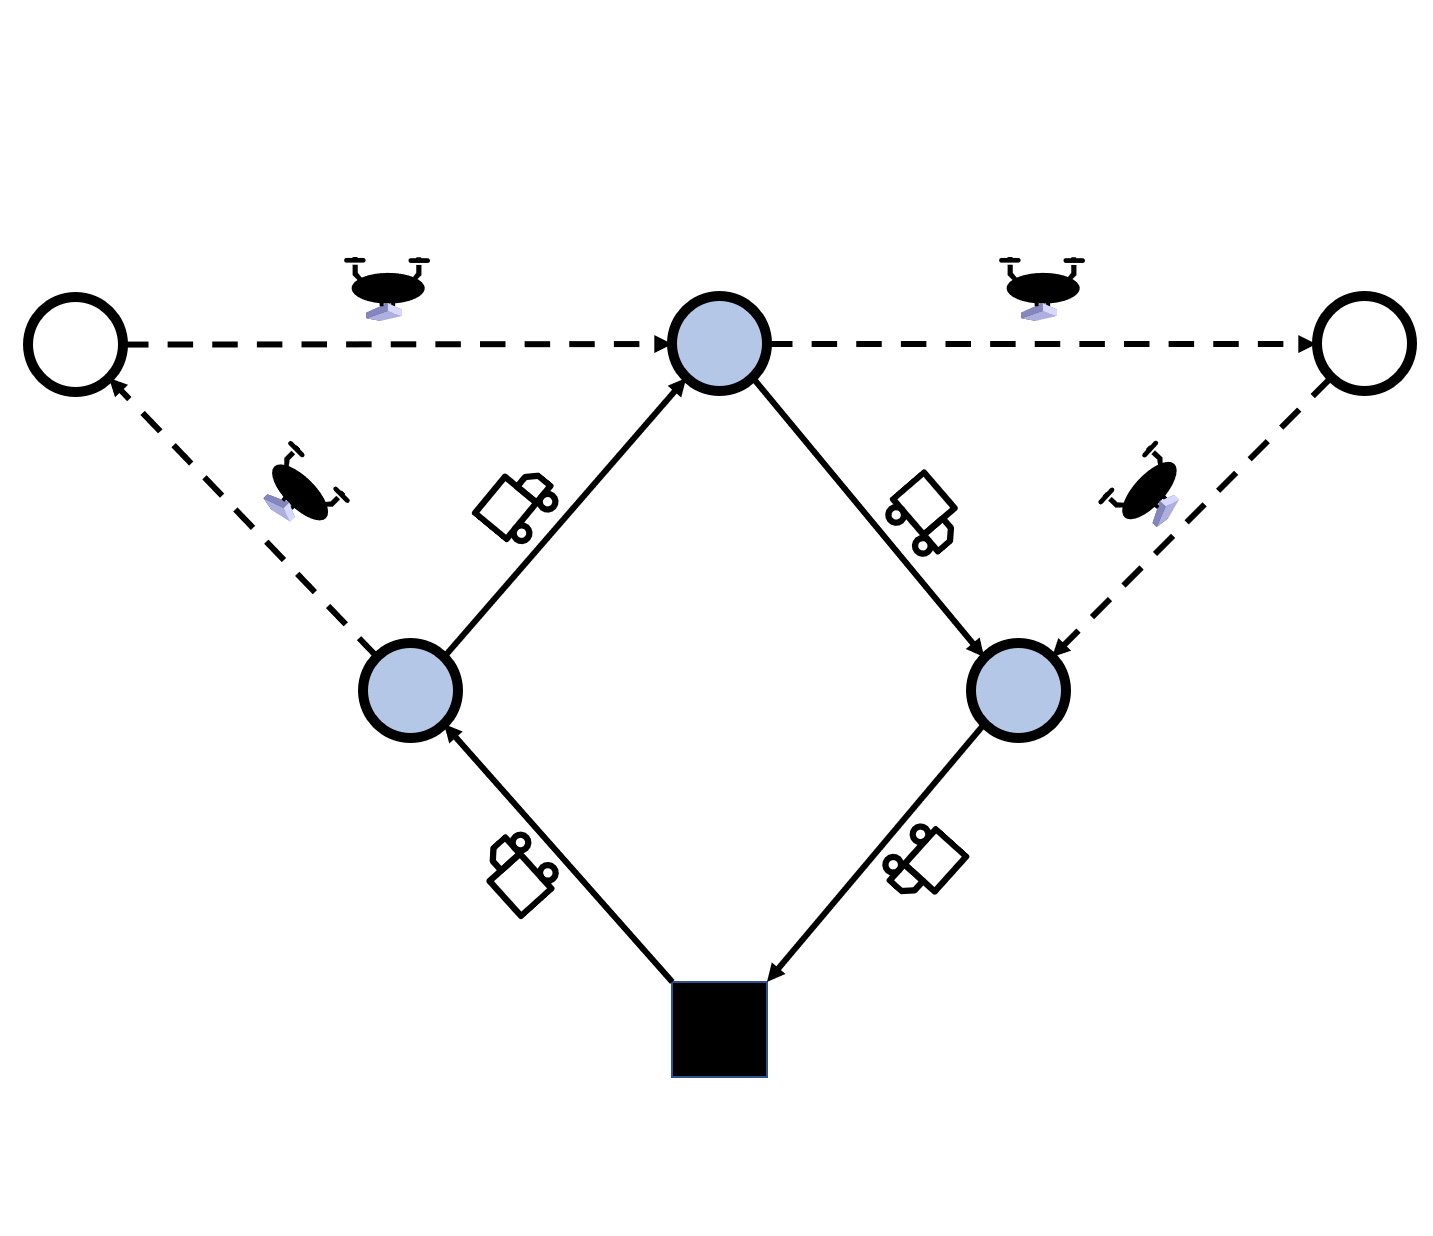 A diagram when a truck drives from the depot to four nodes, and a drone flies from the truck to two other nodes